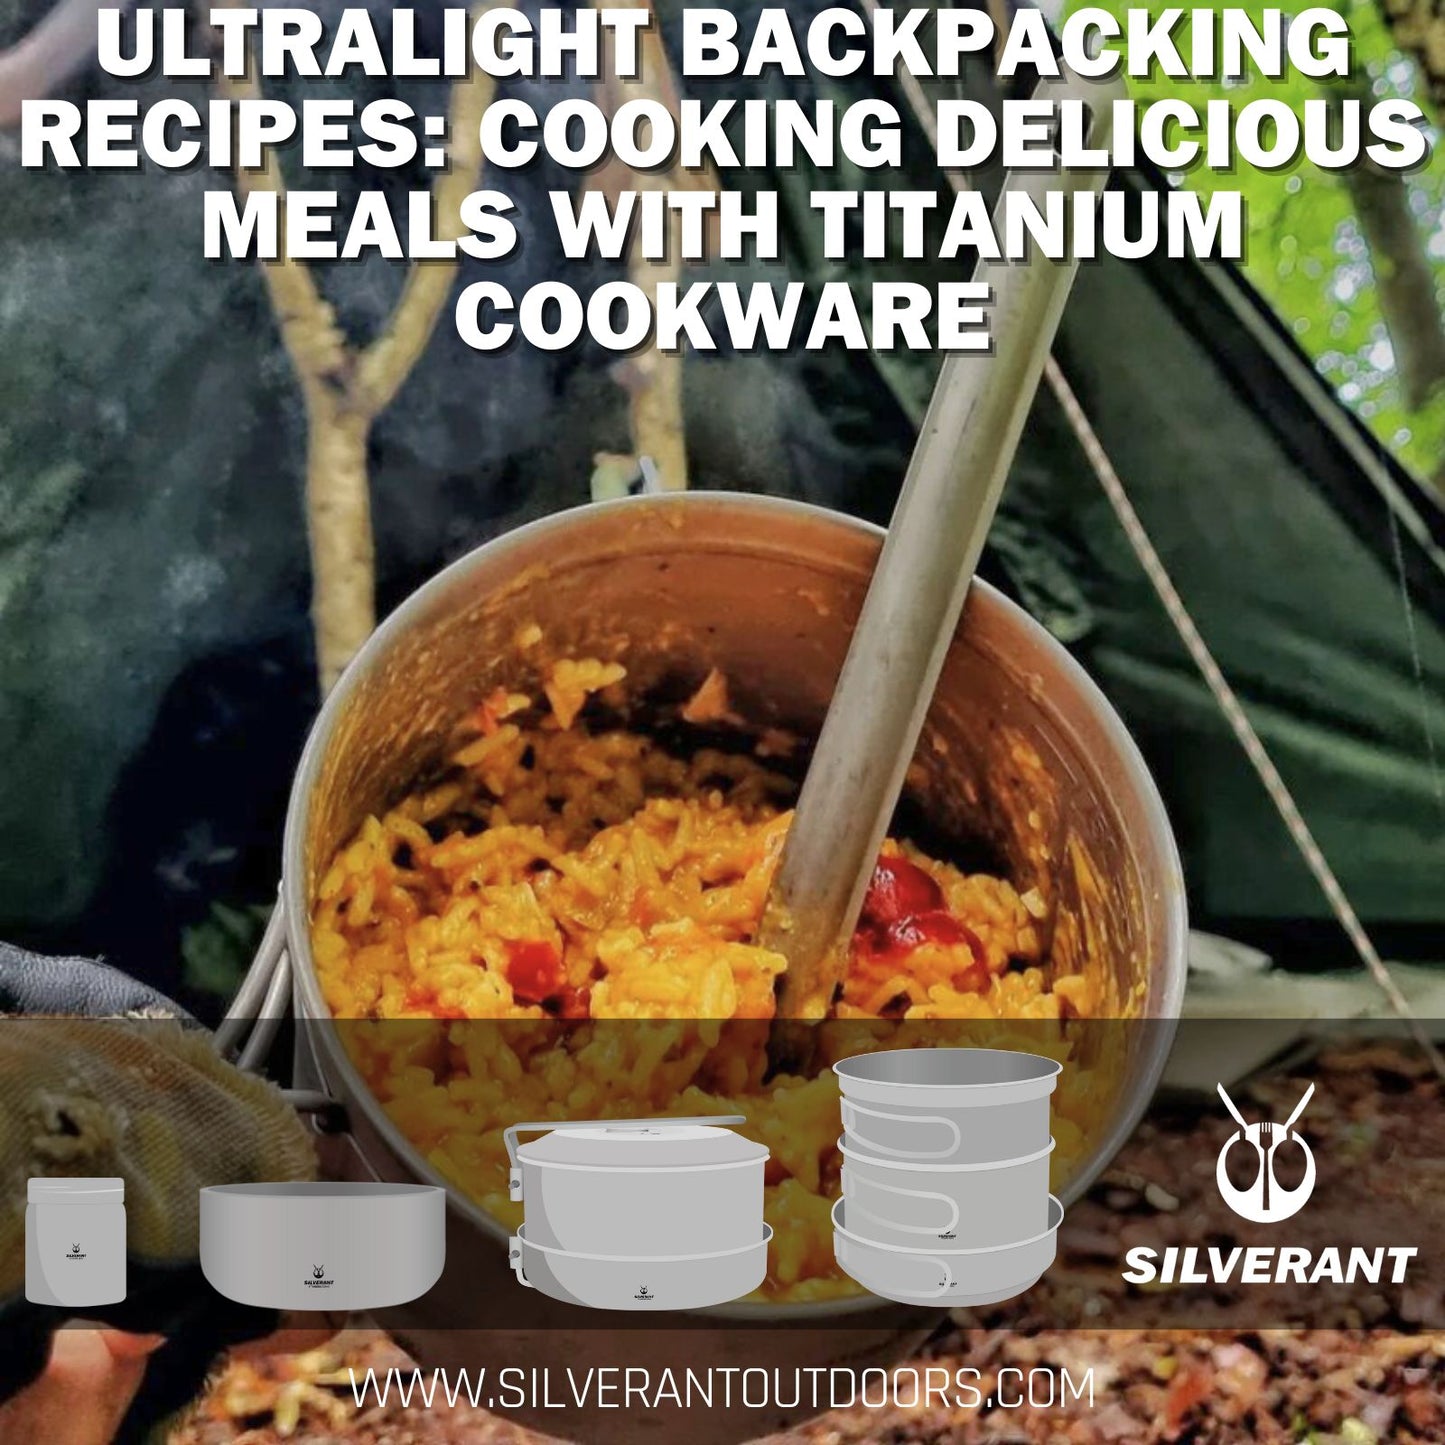 Ultralight Backpacking Recipes: Cooking Delicious Meals with Titanium Cookware